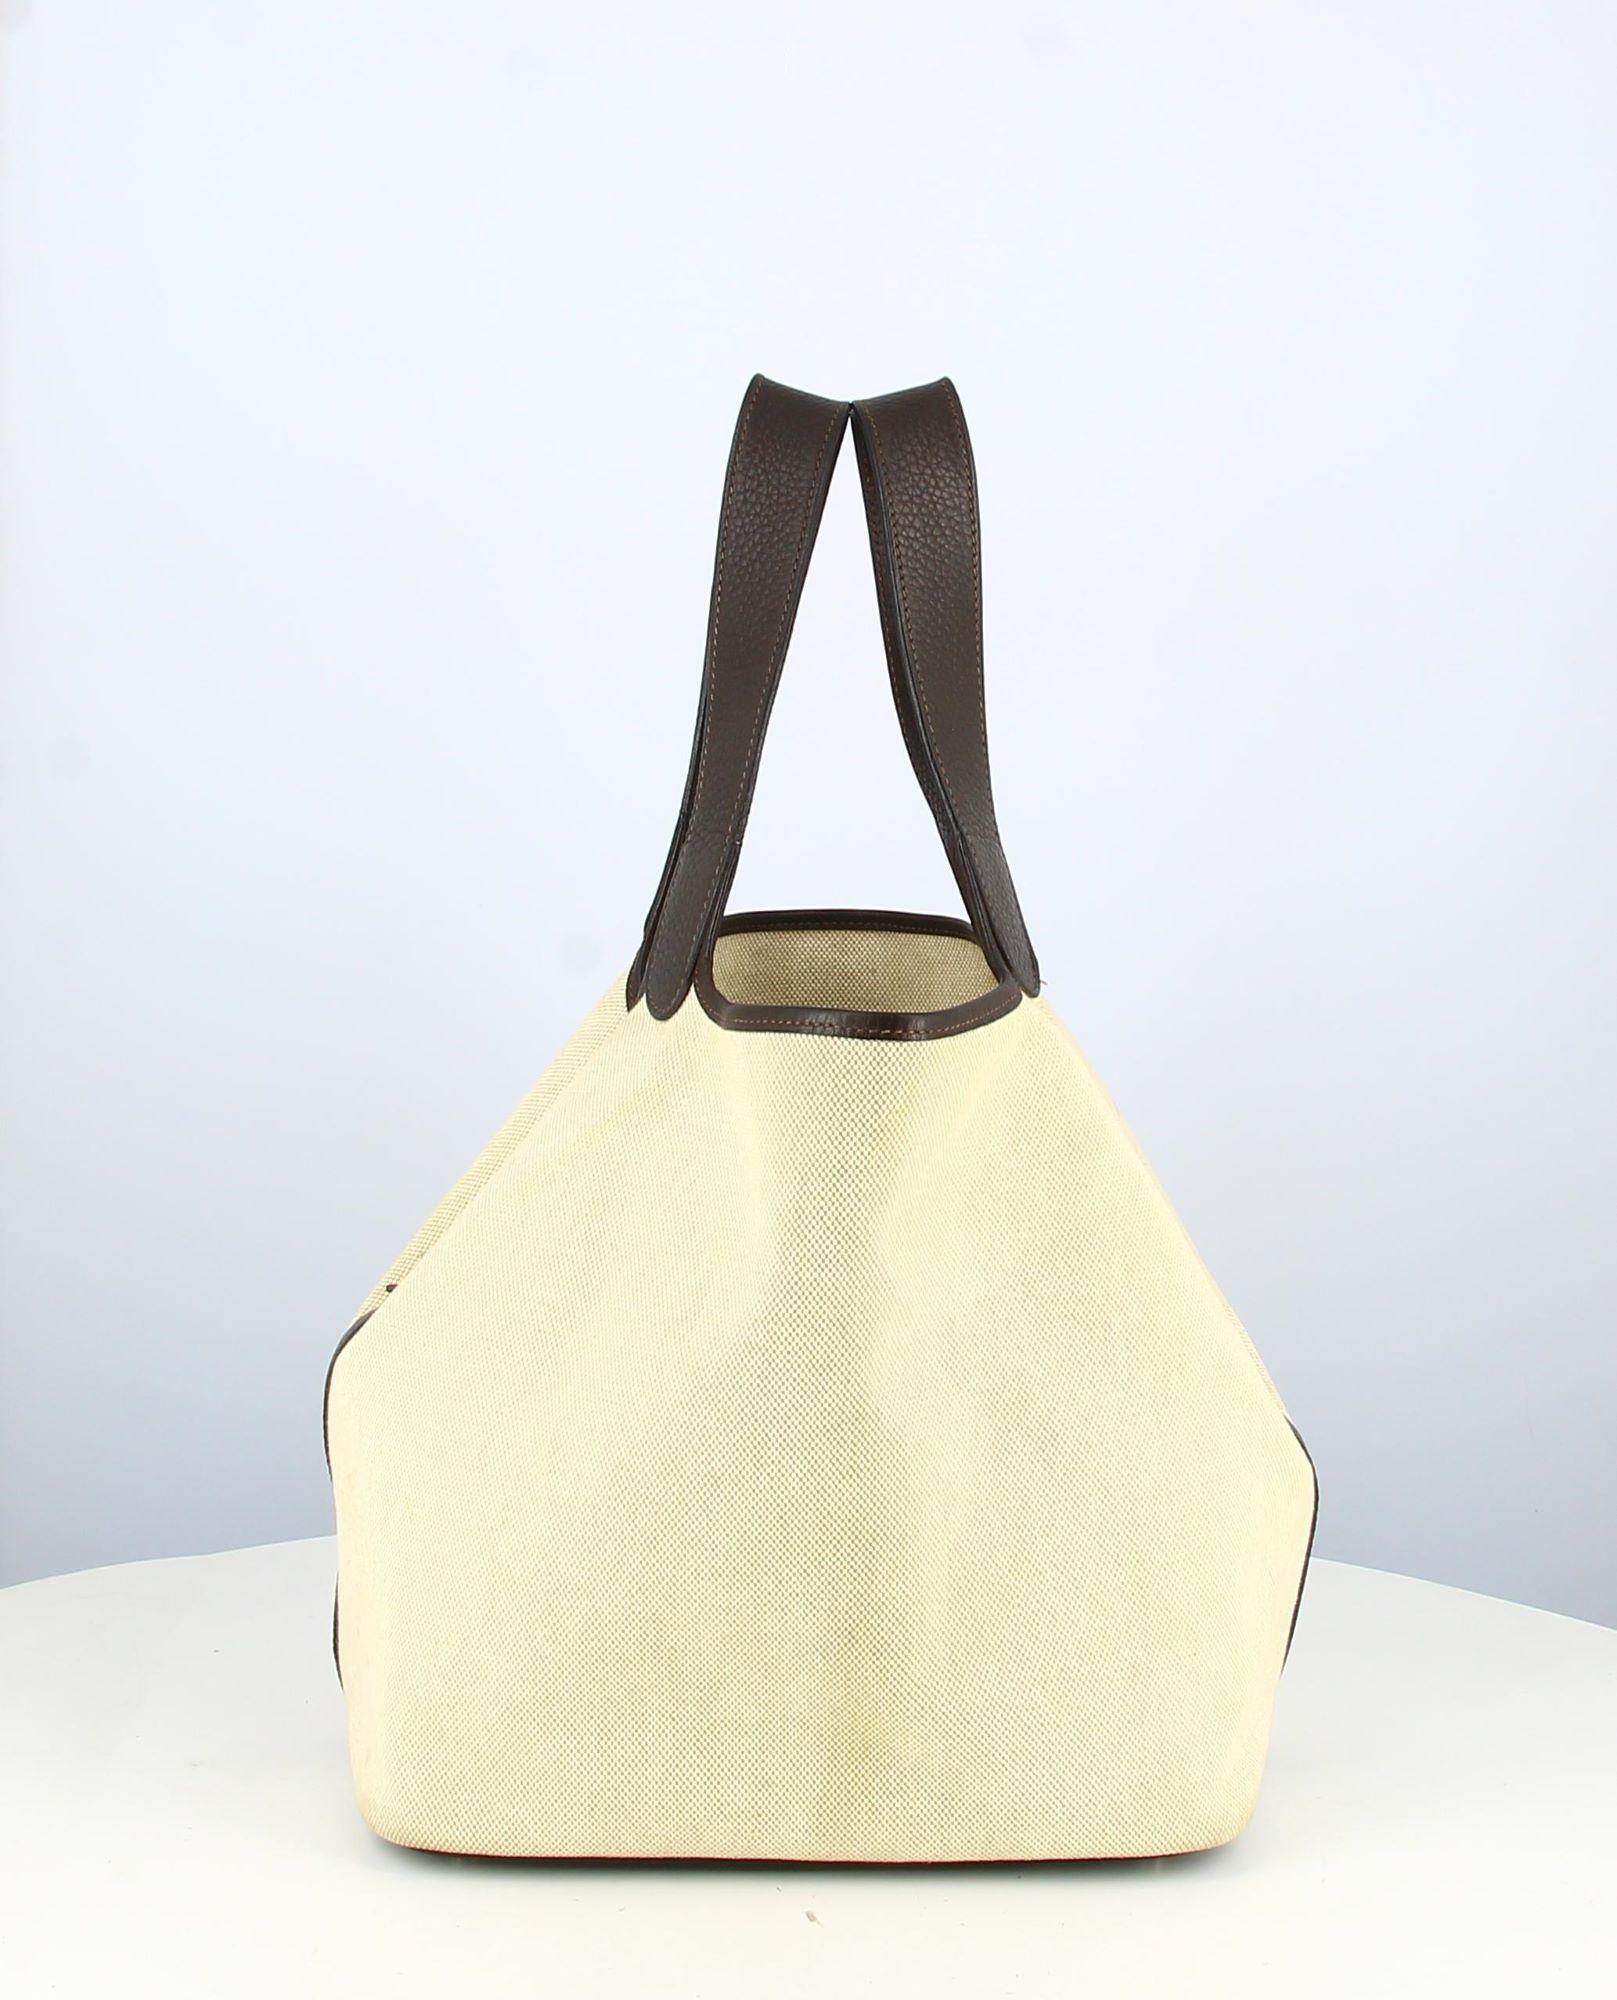 

Hermes Picotin GM Bag Beige Canvas
- Hermes Picotin bag, GM, in beige canvas, brown leather straps togo. Clasp, brown leather band togo
-Condition: - Good condition, small stains and signs of wear
- The interior is in beige canvas.
- Packaging :